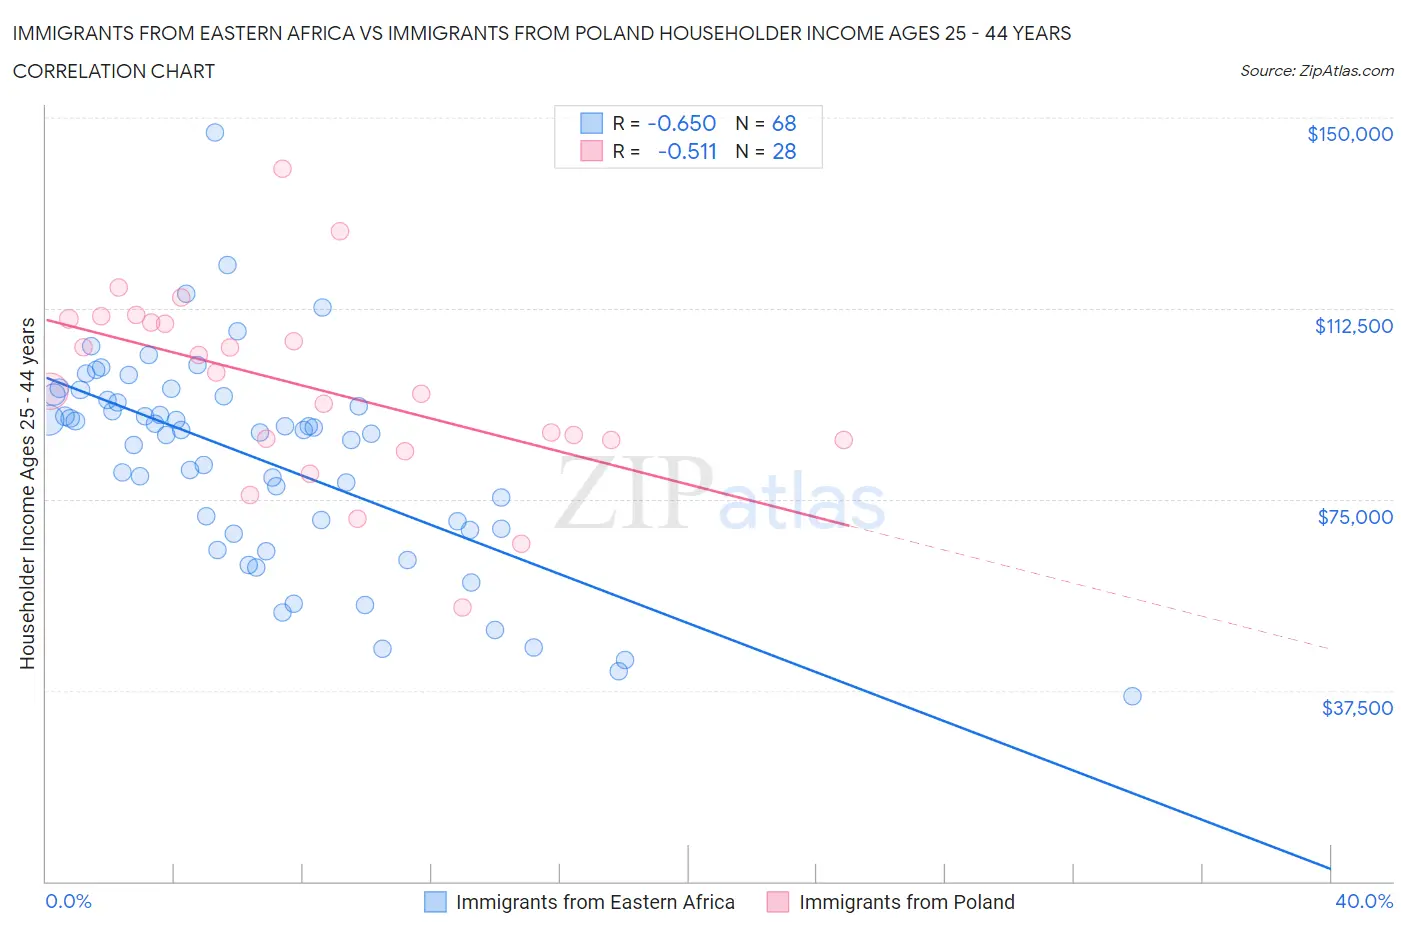 Immigrants from Eastern Africa vs Immigrants from Poland Householder Income Ages 25 - 44 years